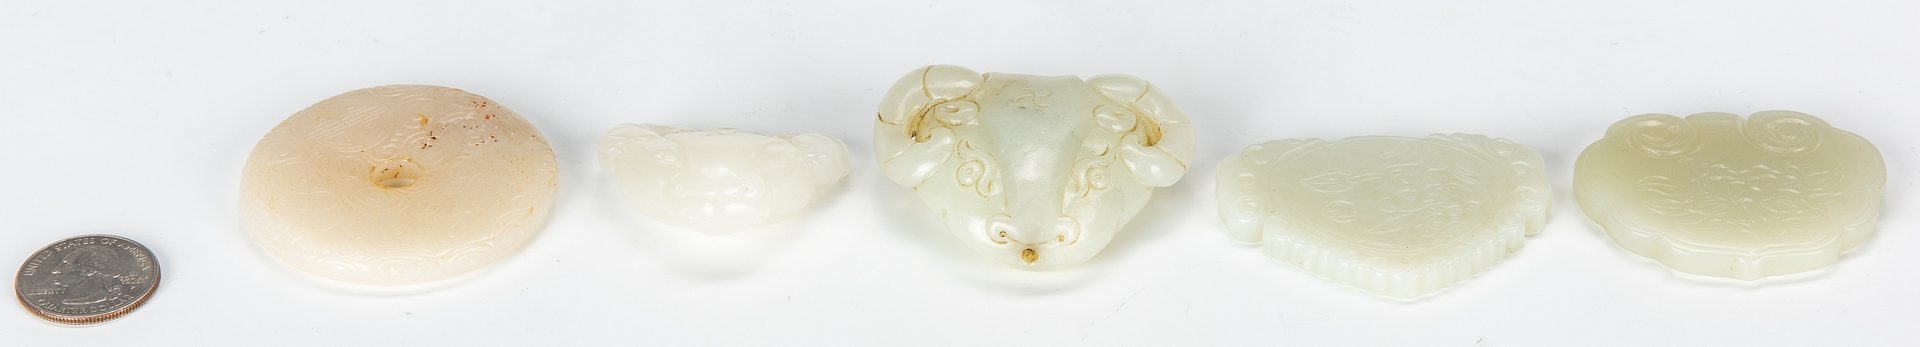 Lot 452: 5 Chinese Jade items including 4 plaques & 1 disc